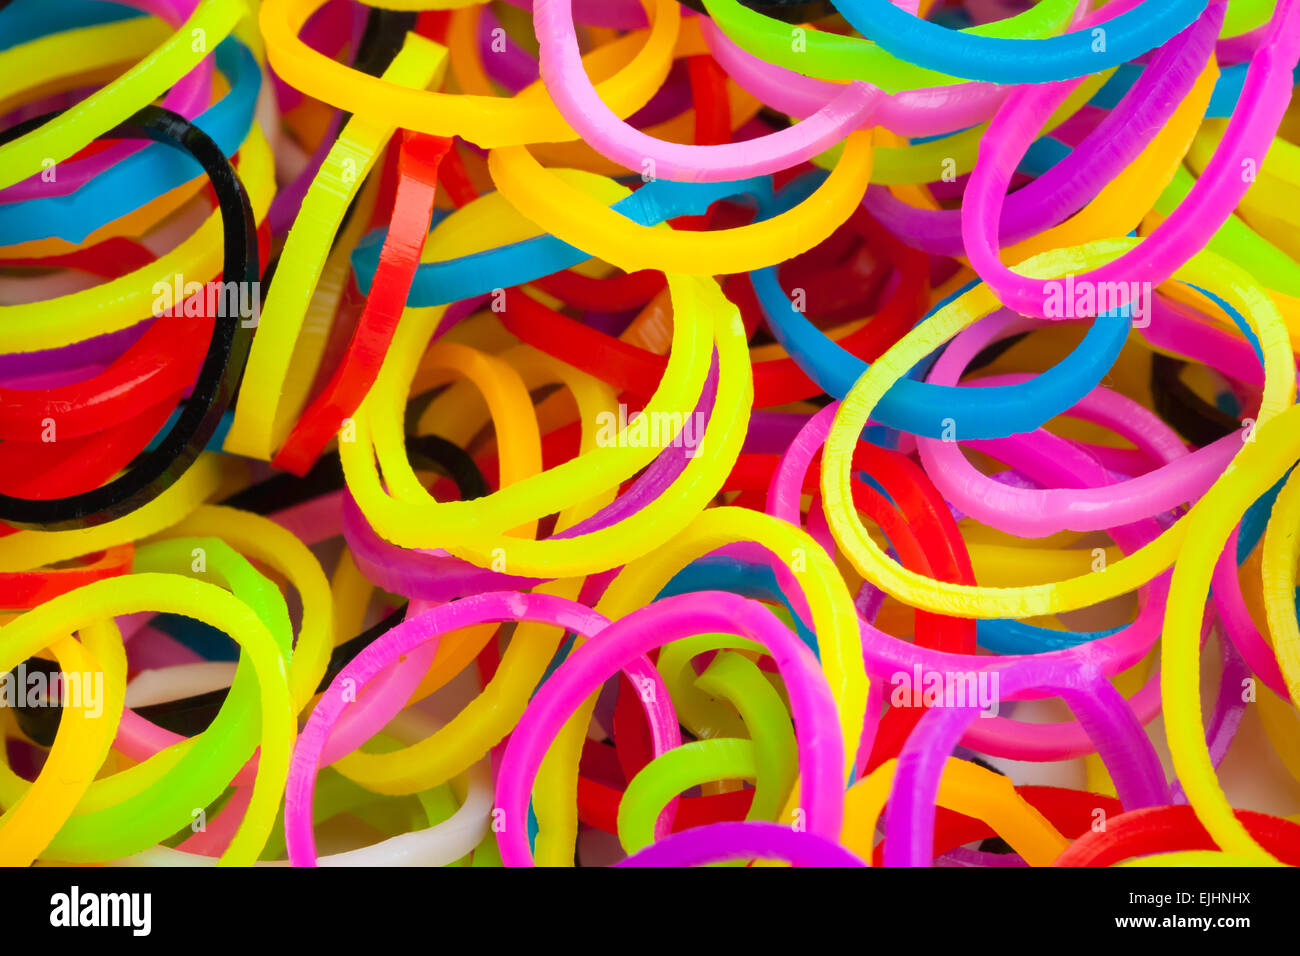 Macro photo of small round colorful rubber bands for making rainbow loom bracelets Stock Photo